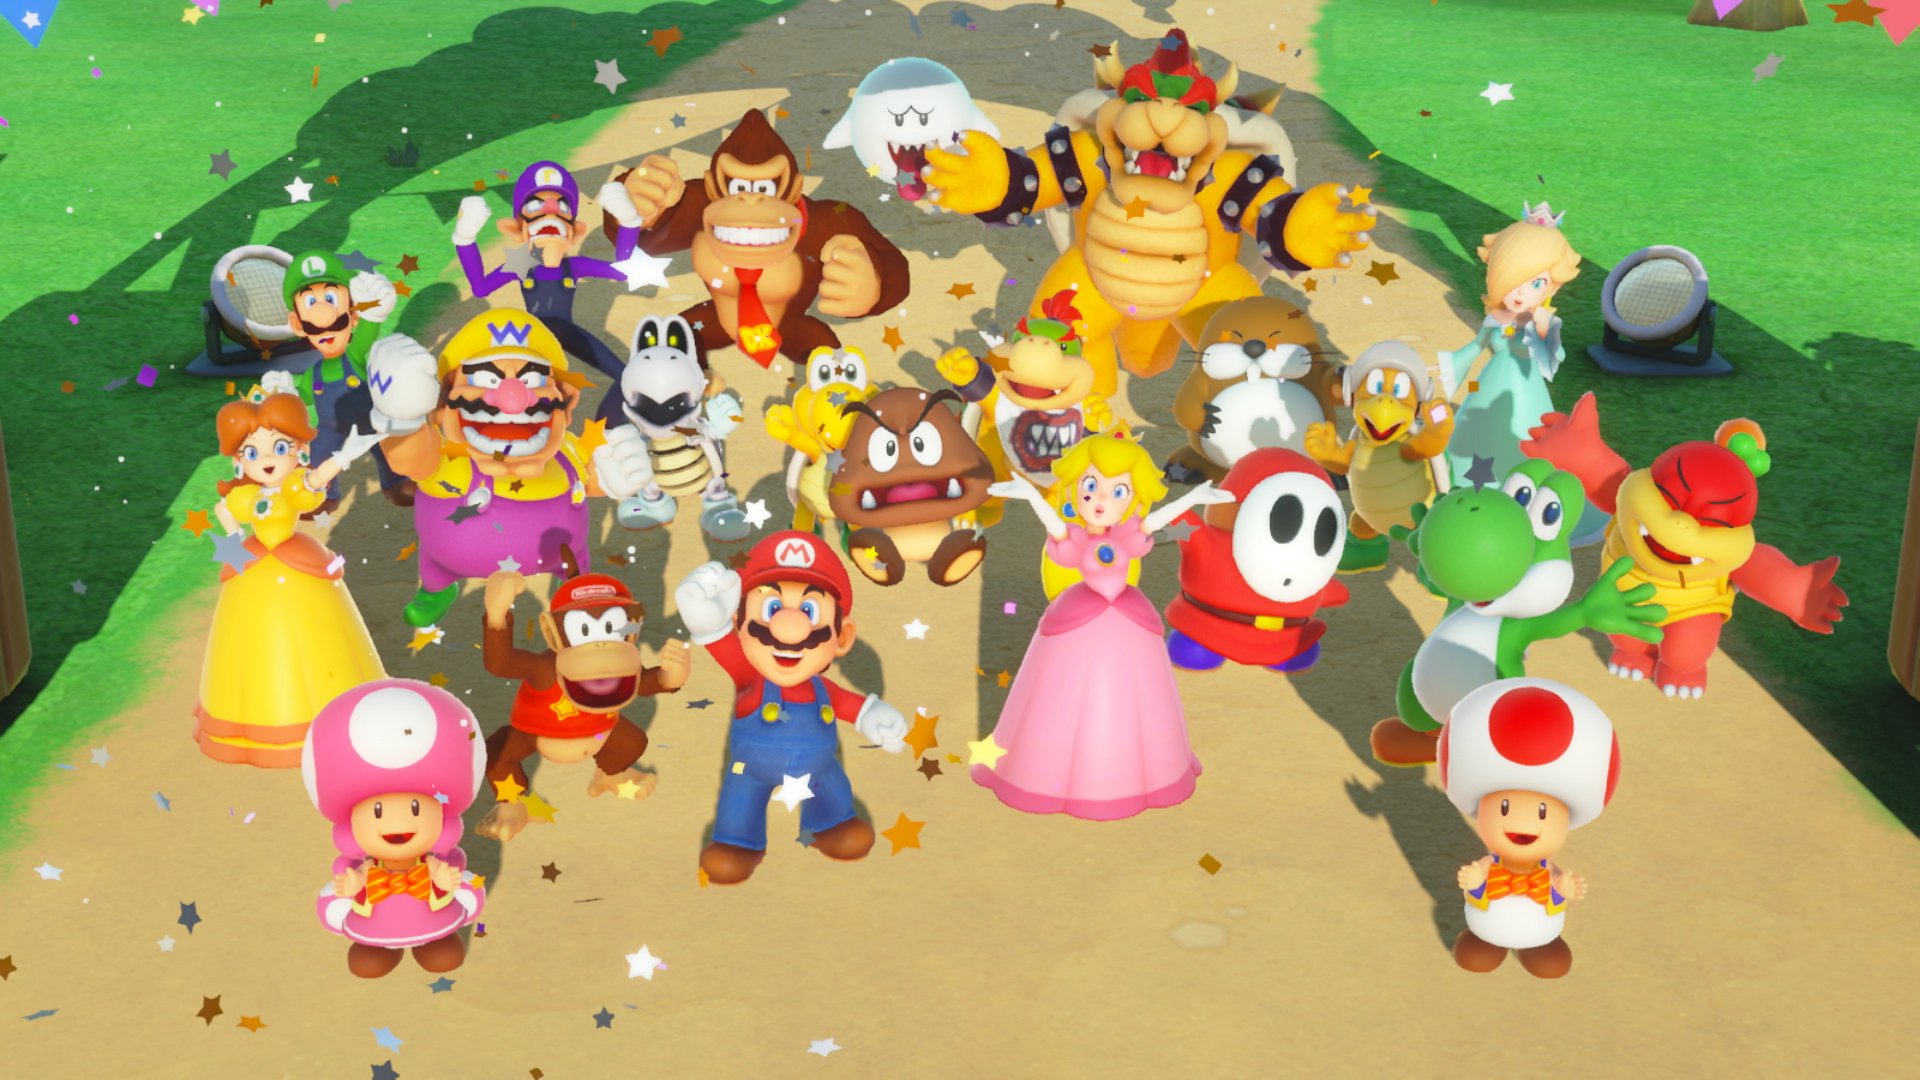 Nintendo Adds A Surprise Online Update To Super Mario Party VGC